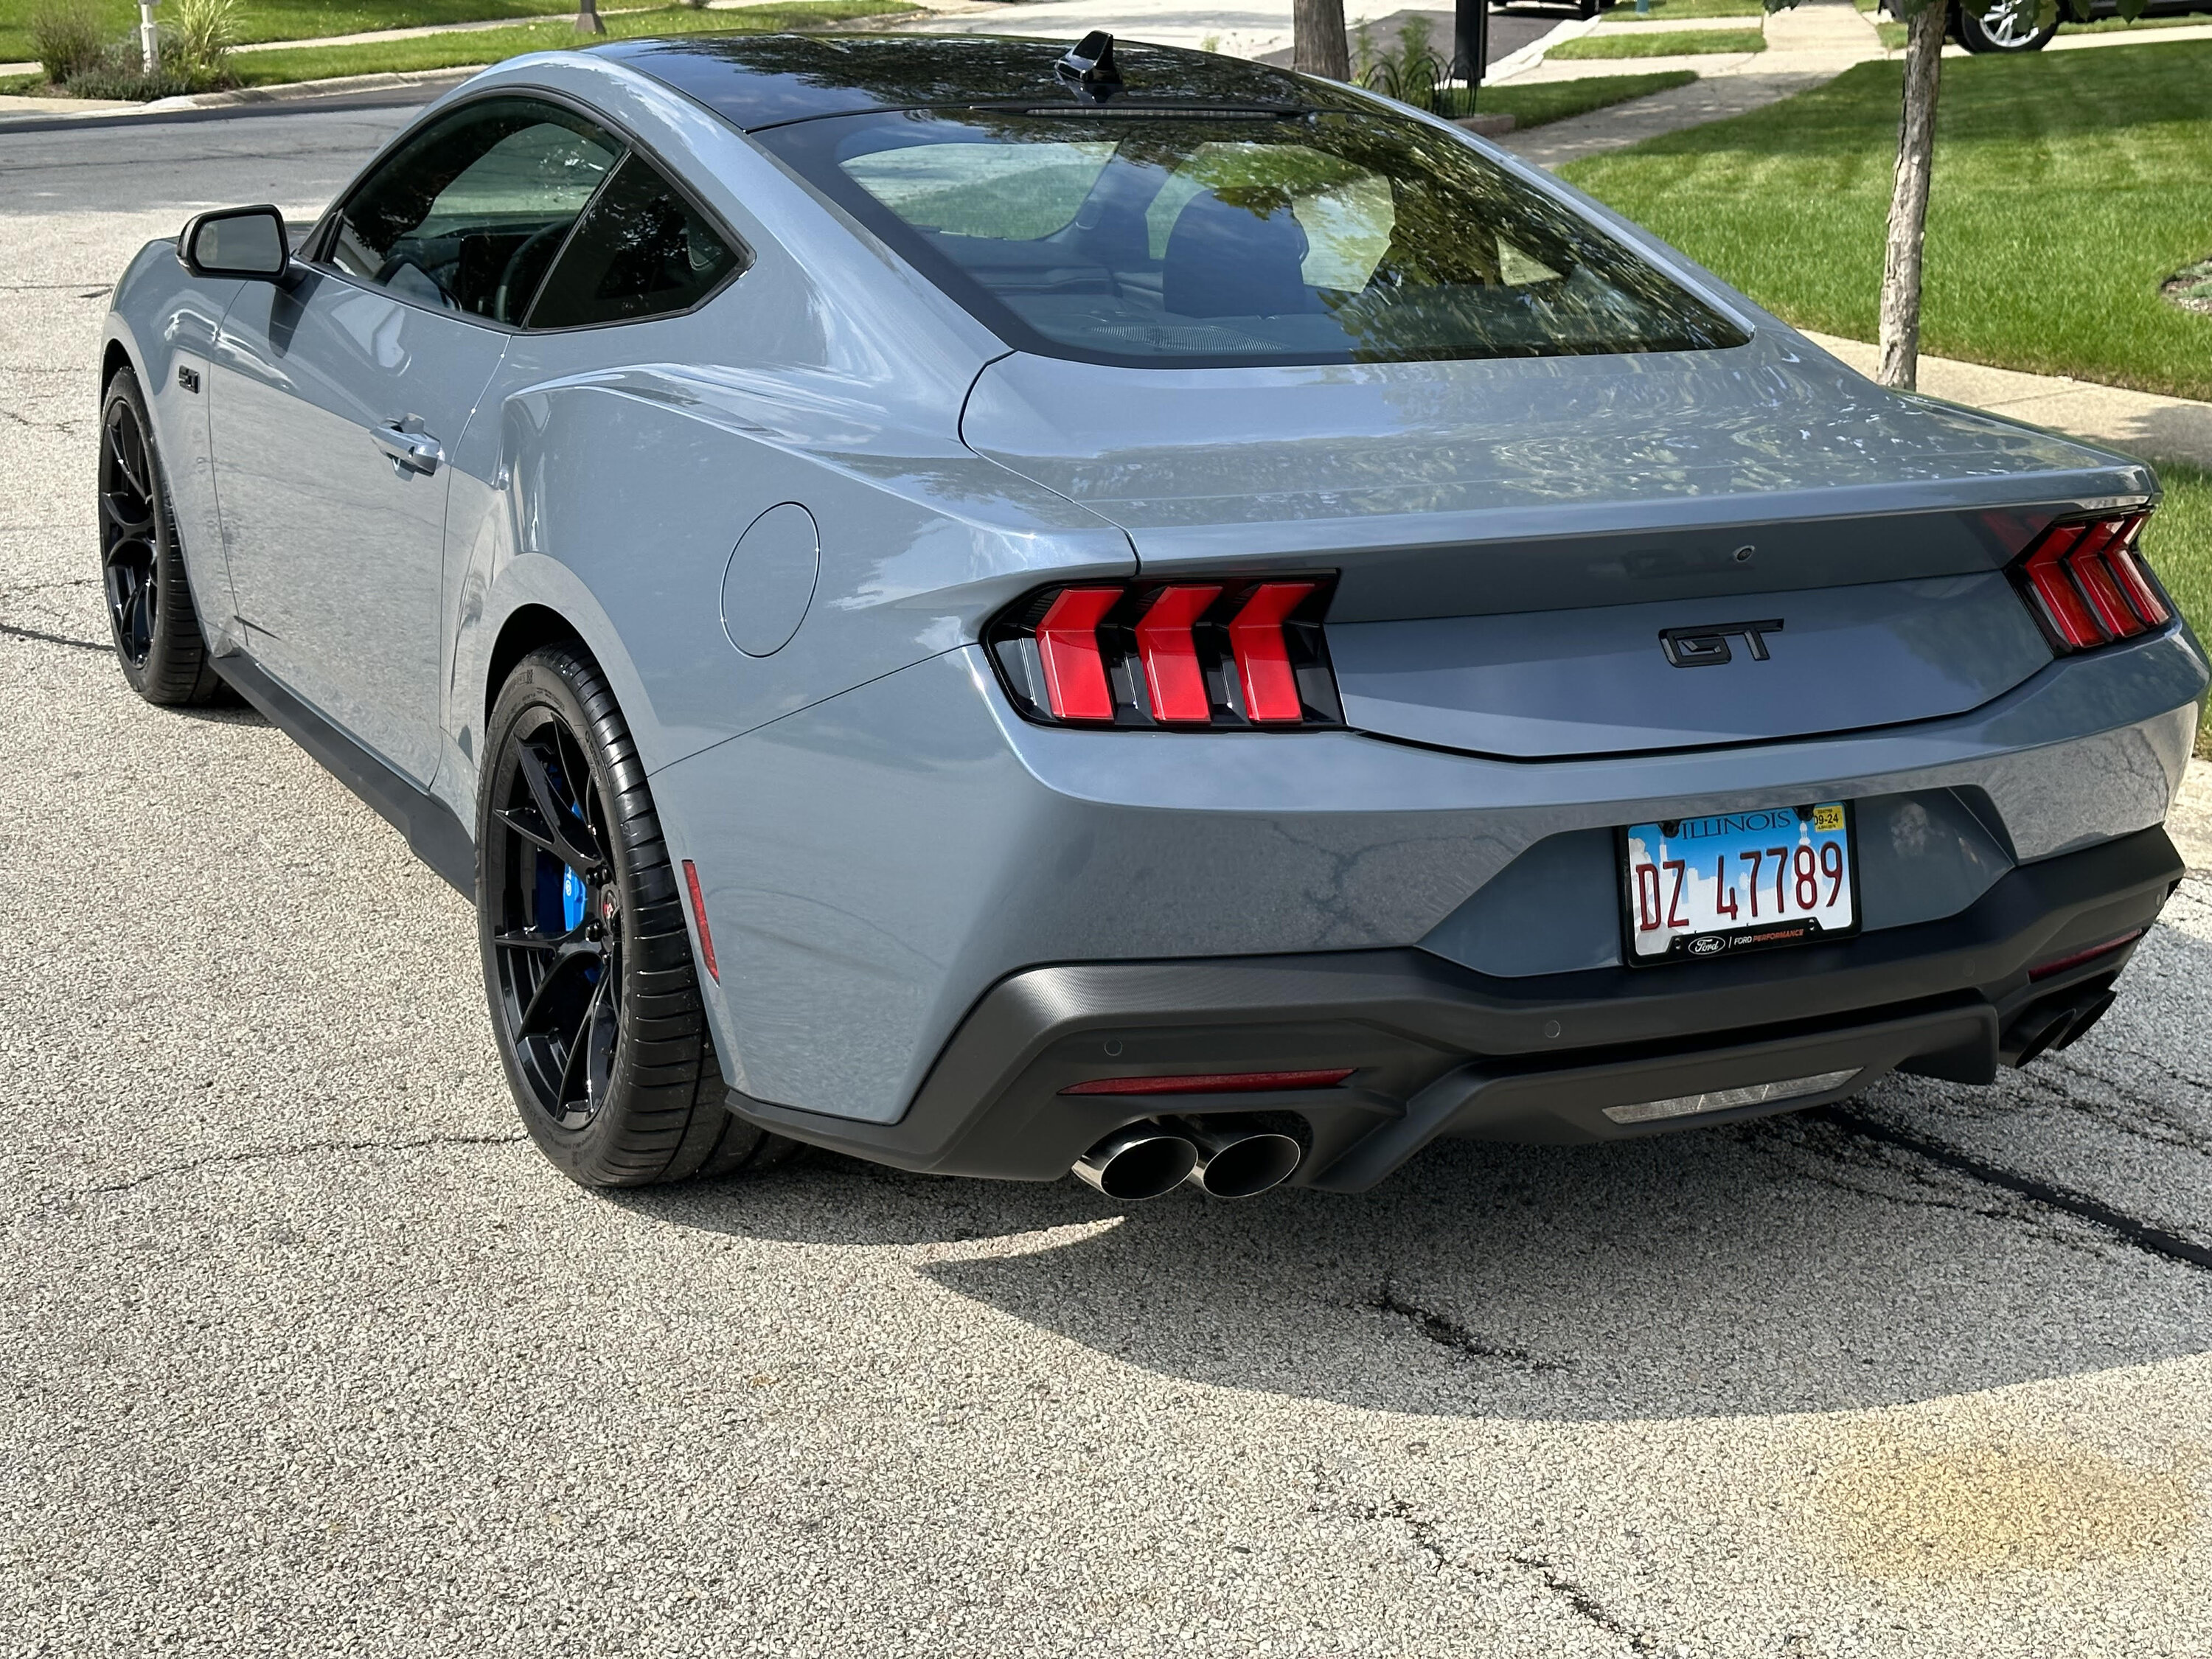 S650 Mustang 2024 Mustang Wheels Offsets & Fitment (same as S550)? VAPOR BLUE 2